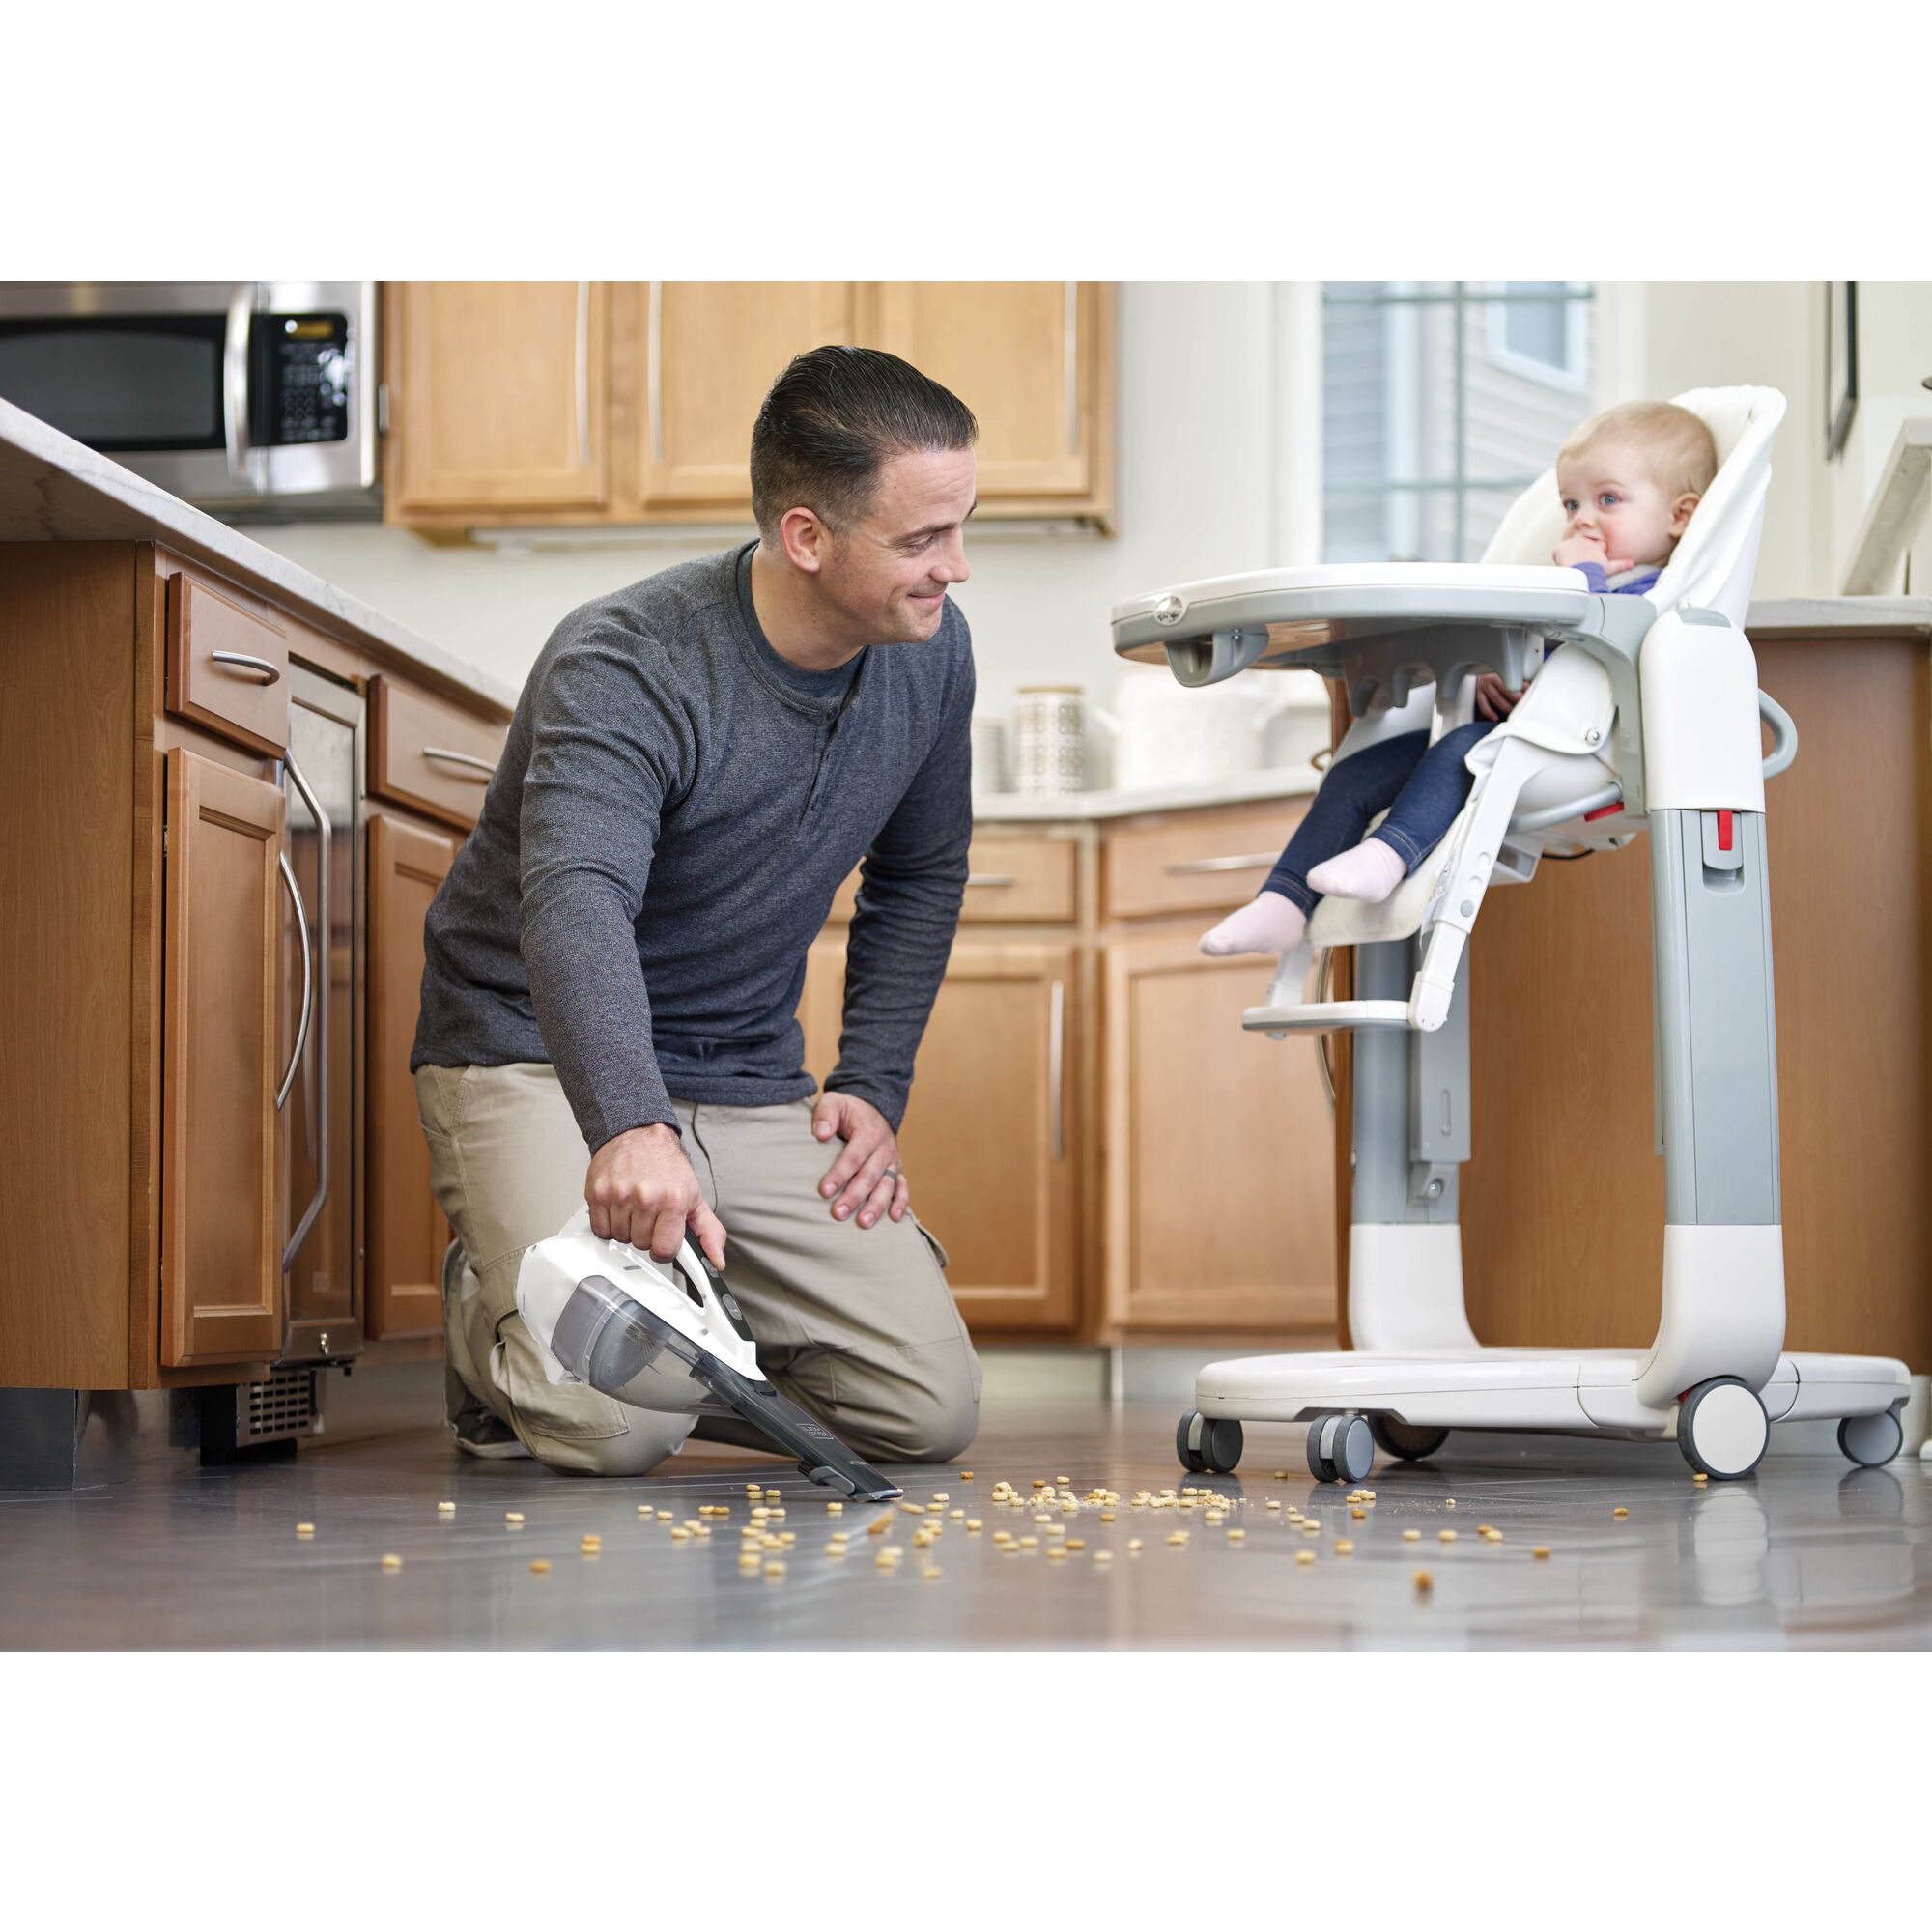 dustbuster AdvancedClean cordless hand vacuum with scented filter being used by a person to clean food spillage.